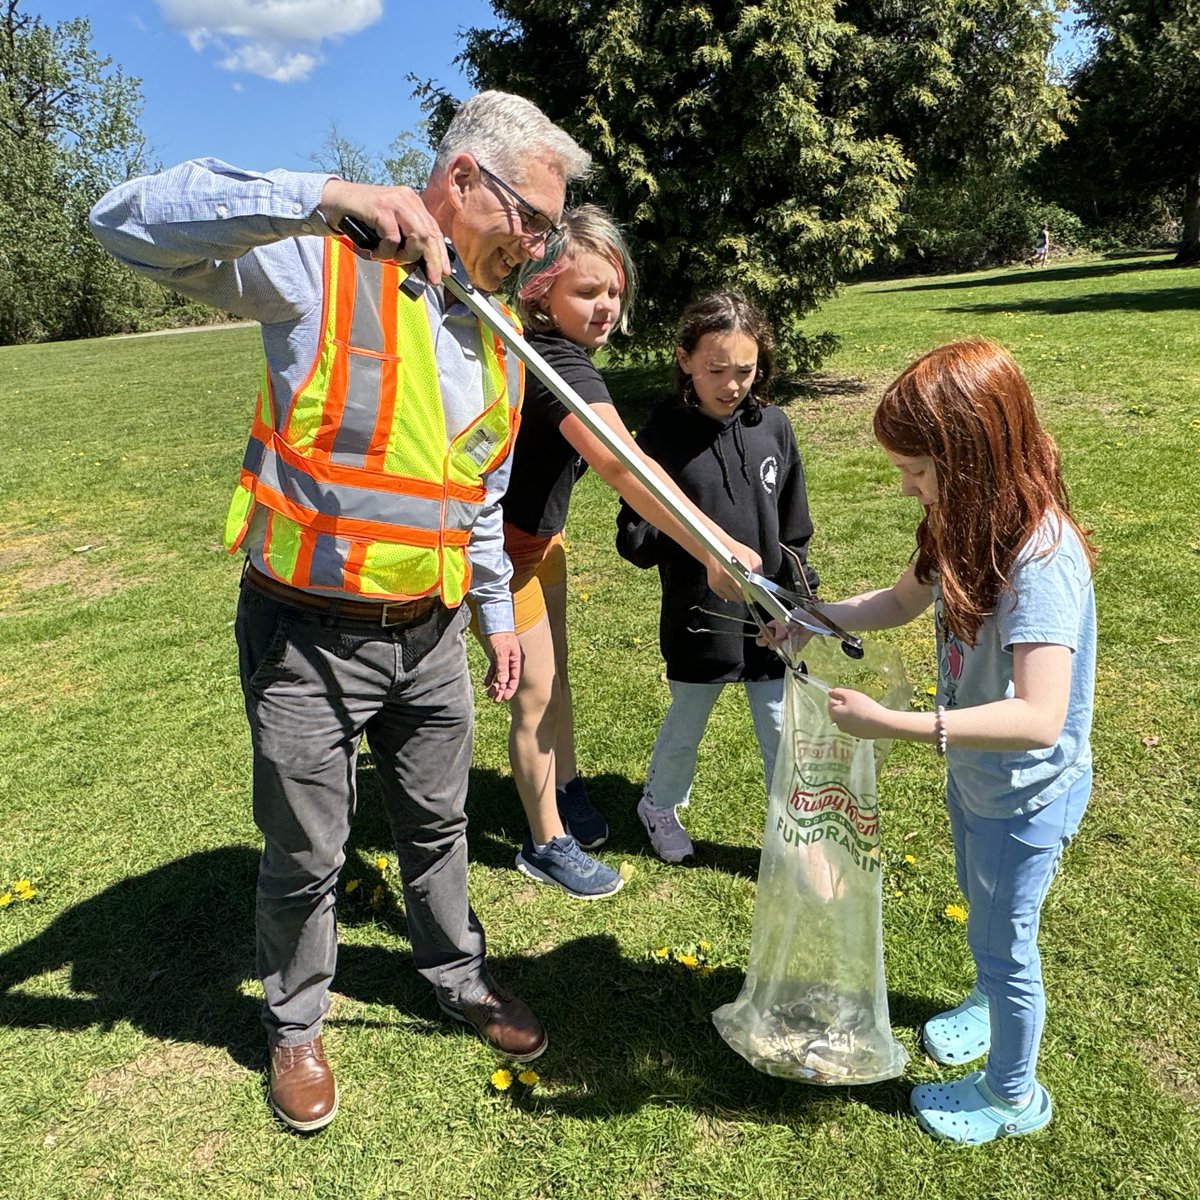 Centennial Park Elementary School French immersion students celebrated Earth Day today by picking up litter at Mill Lake Park. Mayor Siemens tagged along to help with the clean-up efforts.